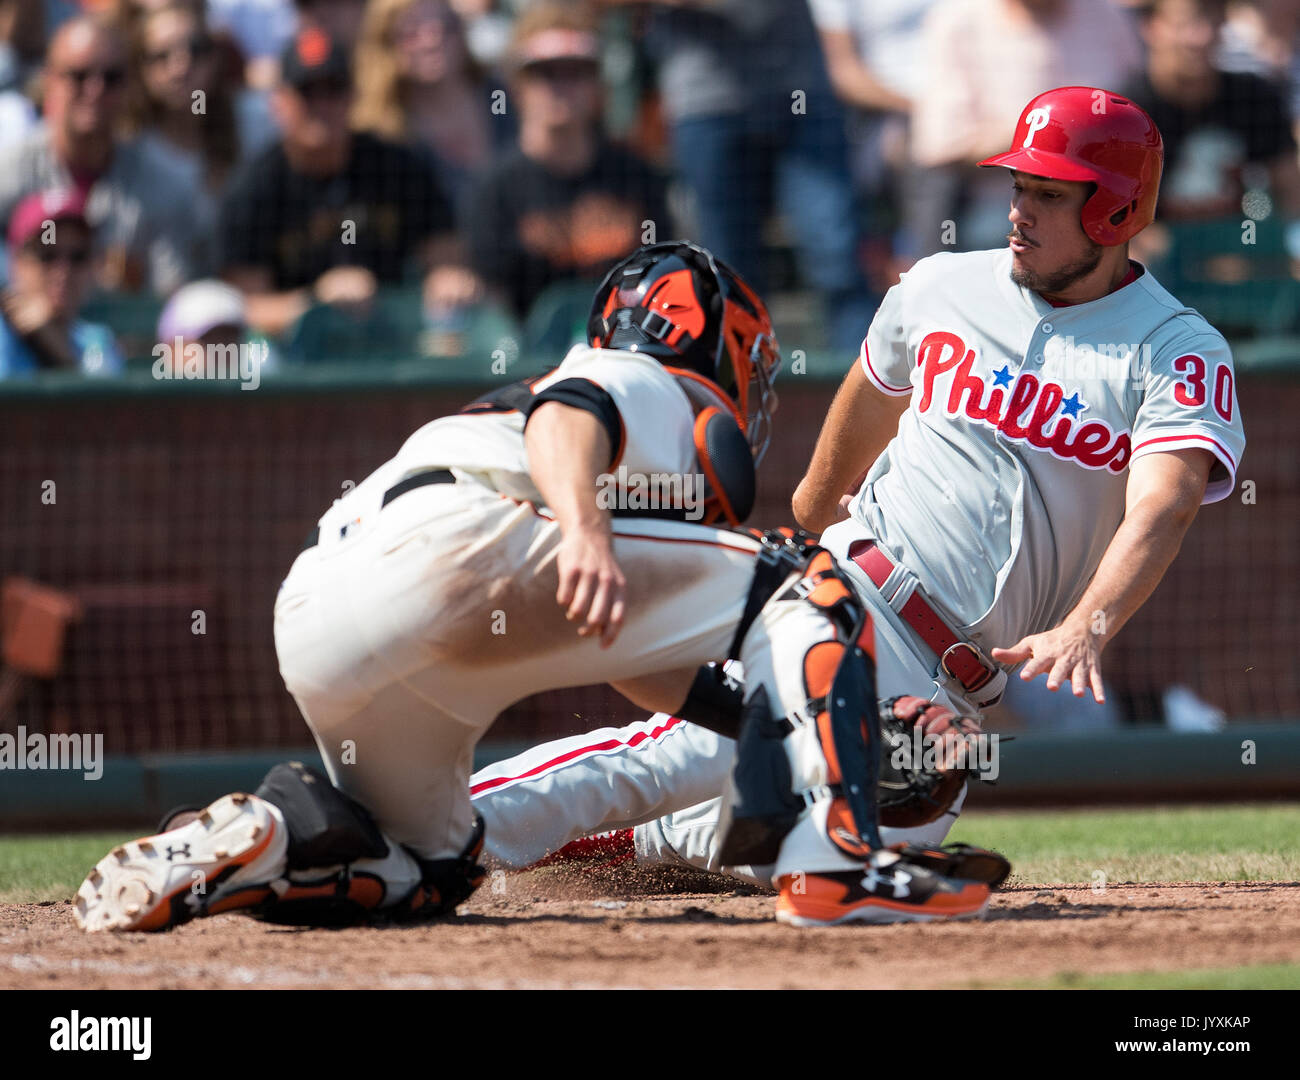 San Francisco, USA. 20th Aug, 2017. Philadelphia Phillies left fielder Cameron Perkins (30) is tagged out by Giants catcher Buster Posey (28), during the seventh inning of a MLB game between the Philadelphia Phillies and the San Francisco Giants at AT&T Park in San Francisco, California. Credit: Cal Sport Media/Alamy Live News Stock Photo